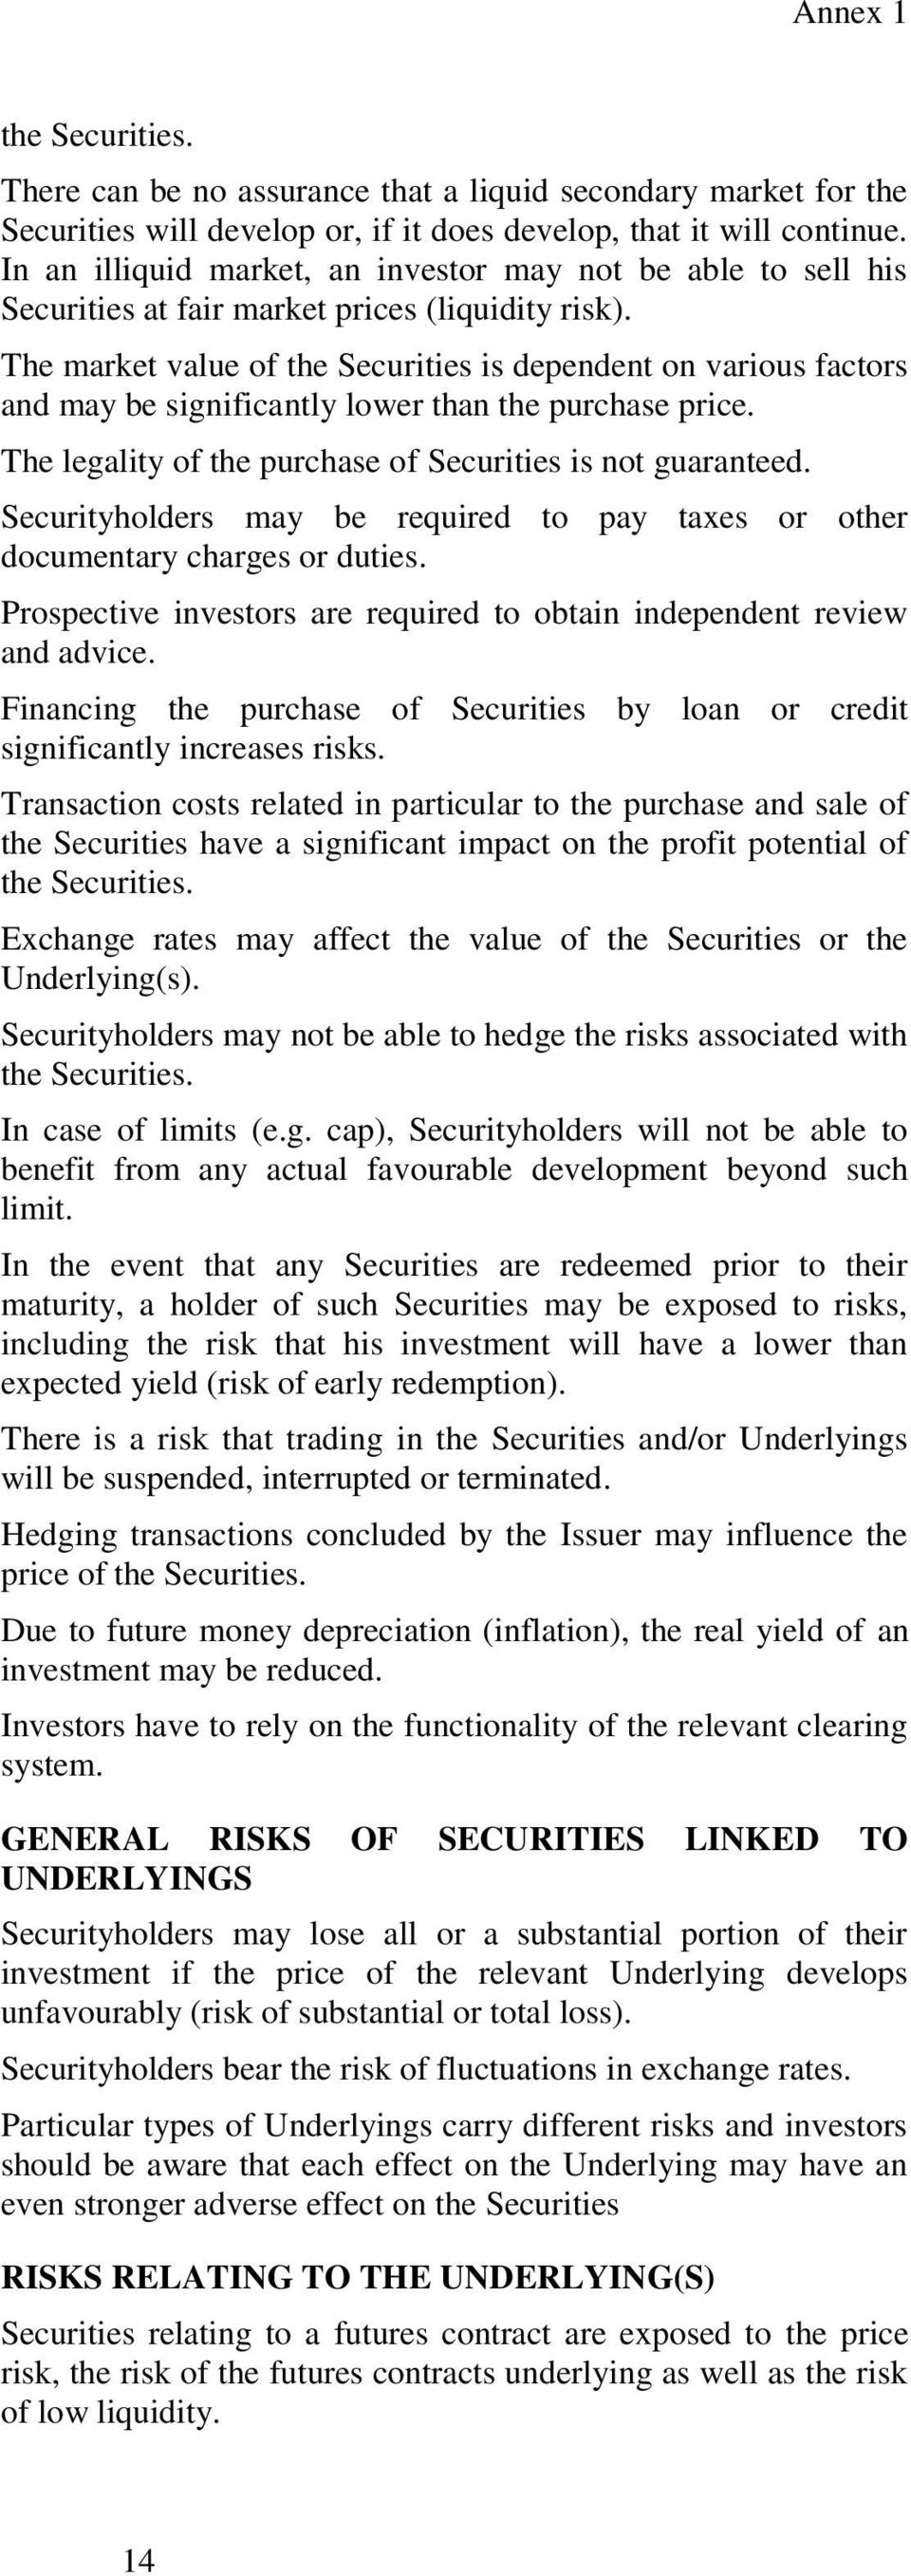 The market value of the Securities is dependent on various factors and may be significantly lower than the purchase price. The legality of the purchase of Securities is not guaranteed.